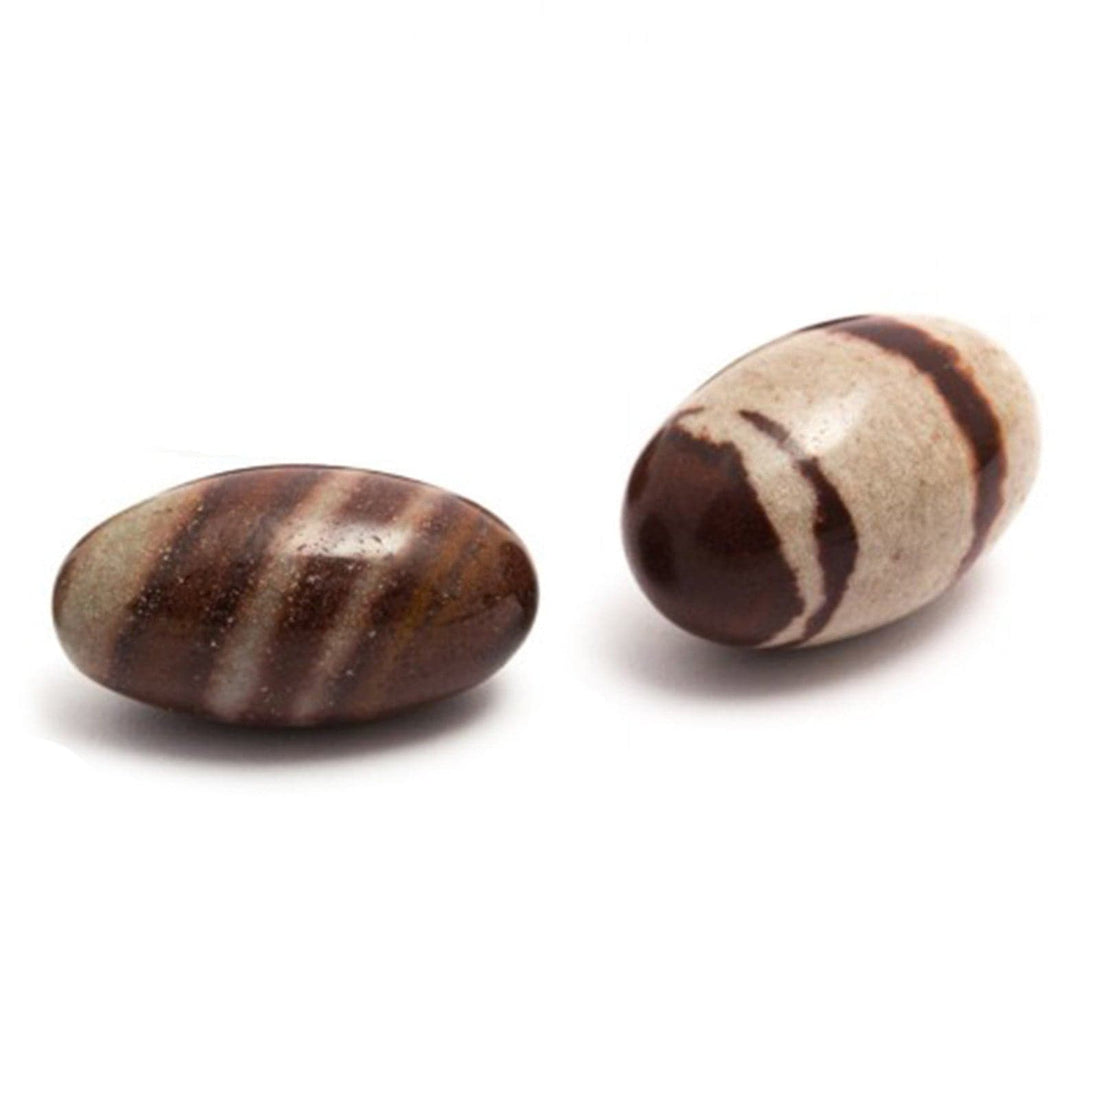 Two Inch Lingam - 2 Stones - best price from Maltashopper.com LING-02